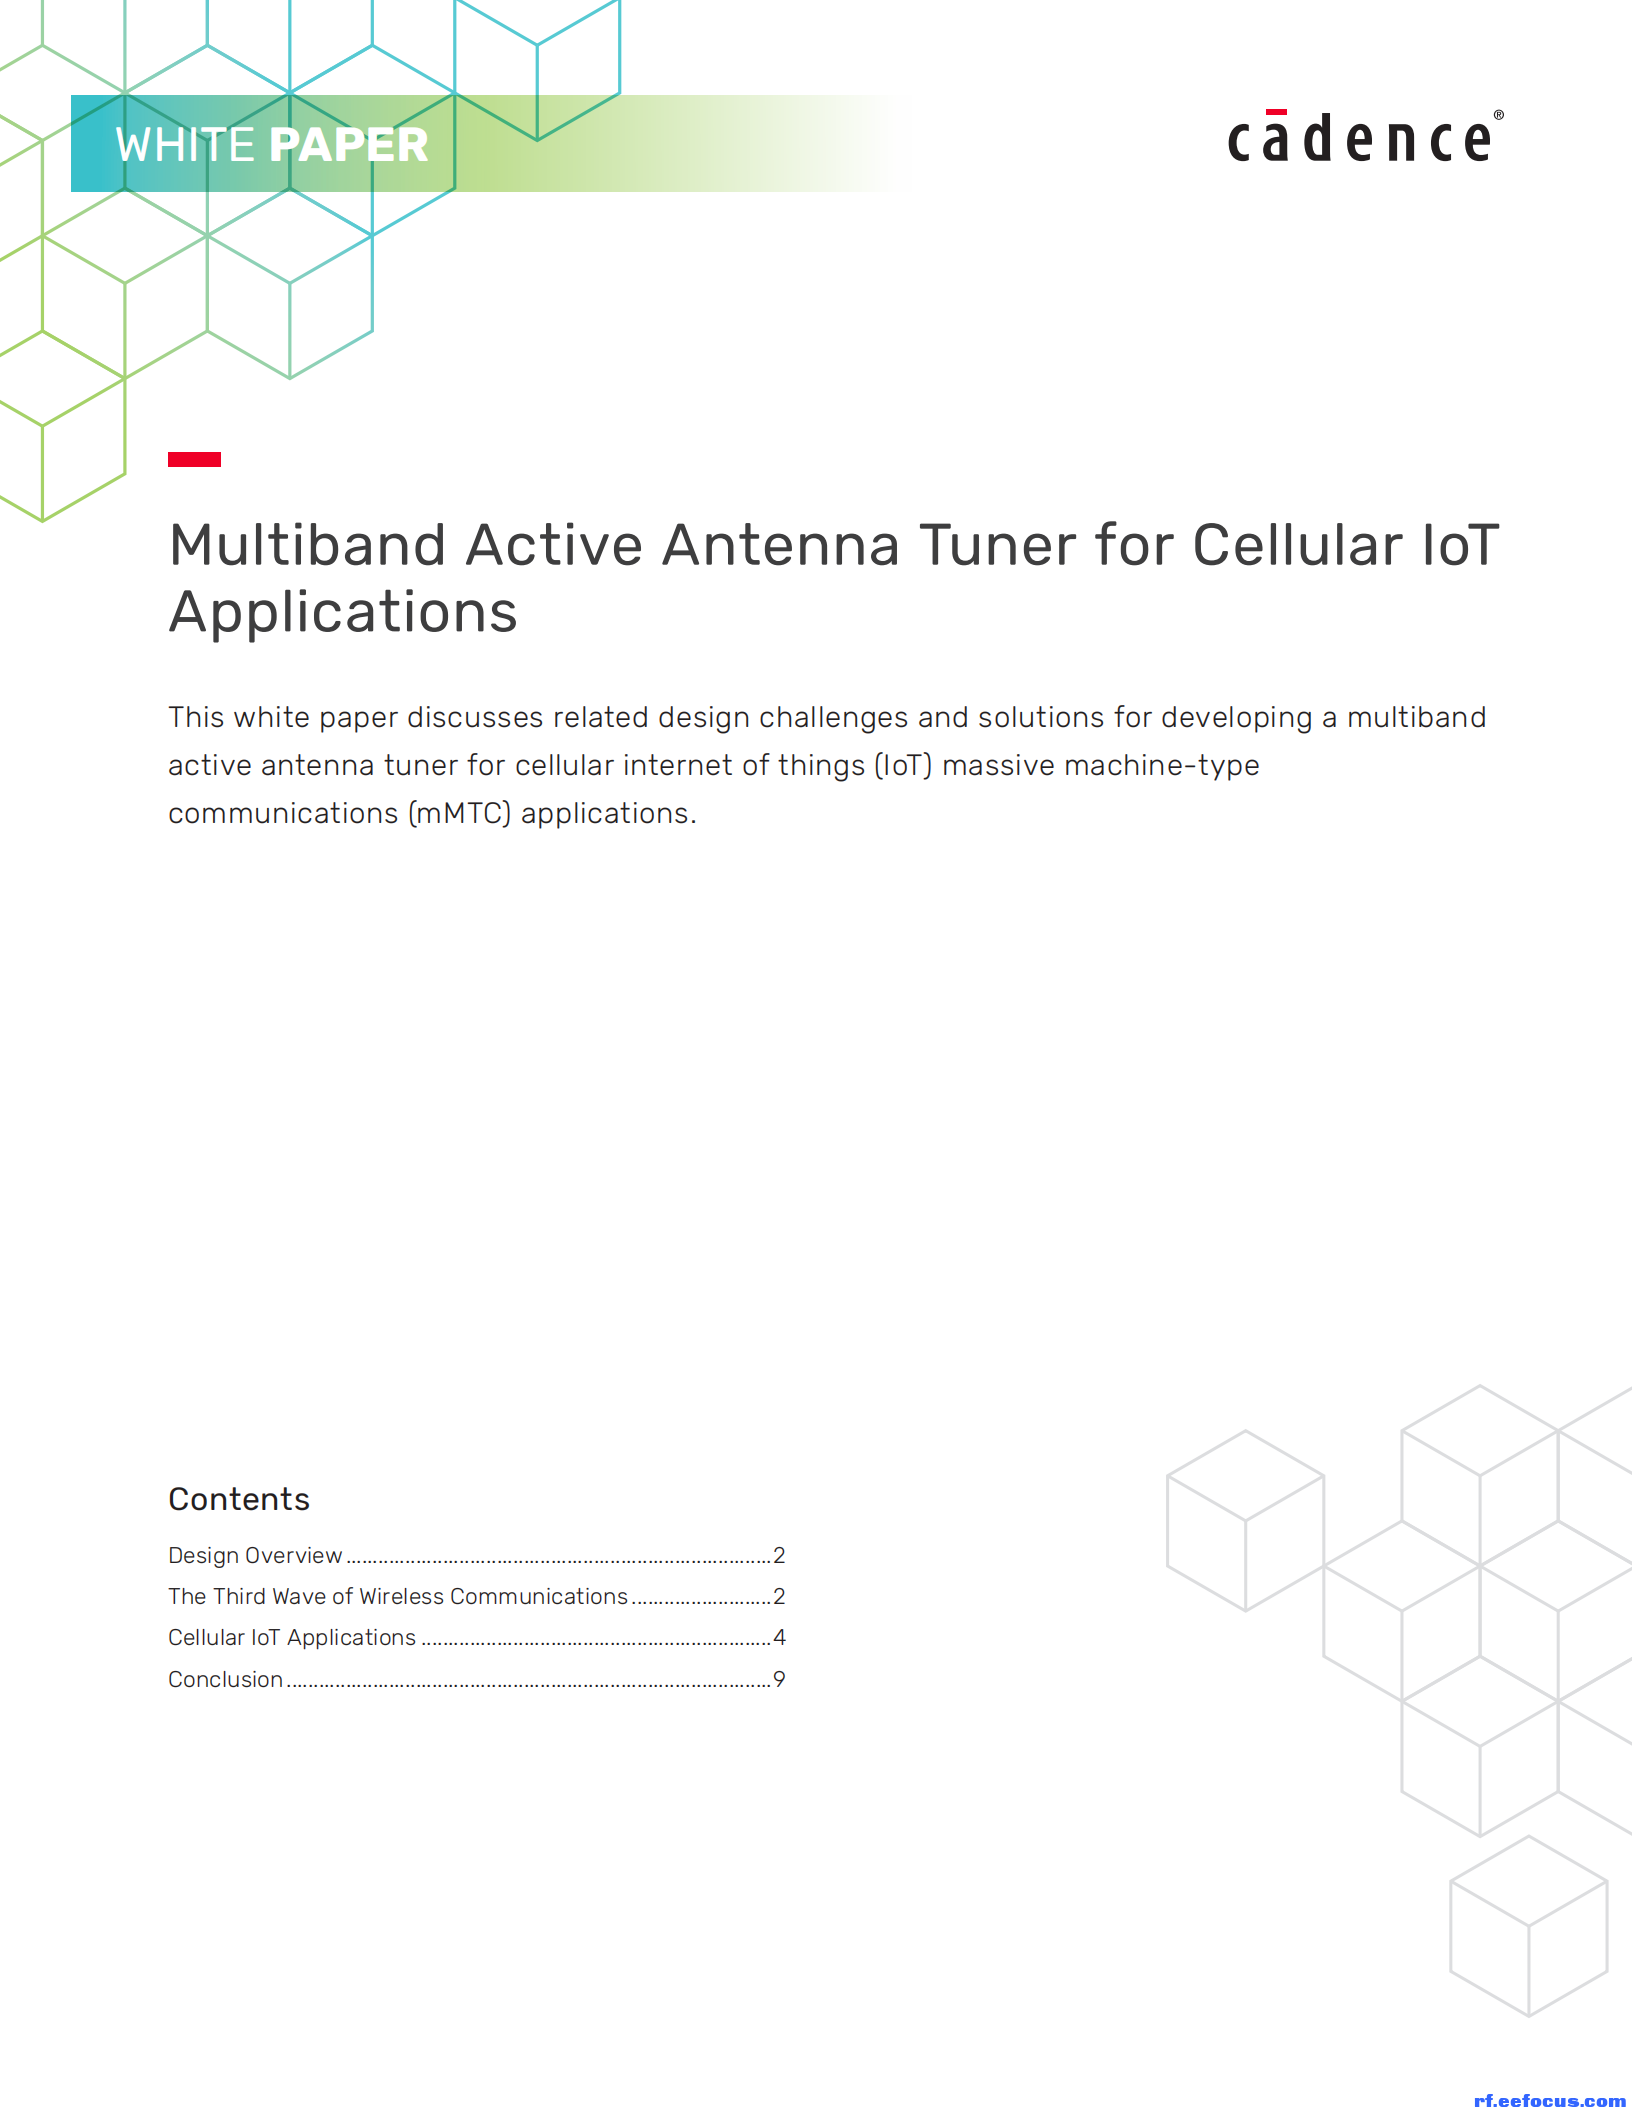 multiband-active-antenna-tuner-for-cellular-iot-wp_00.png